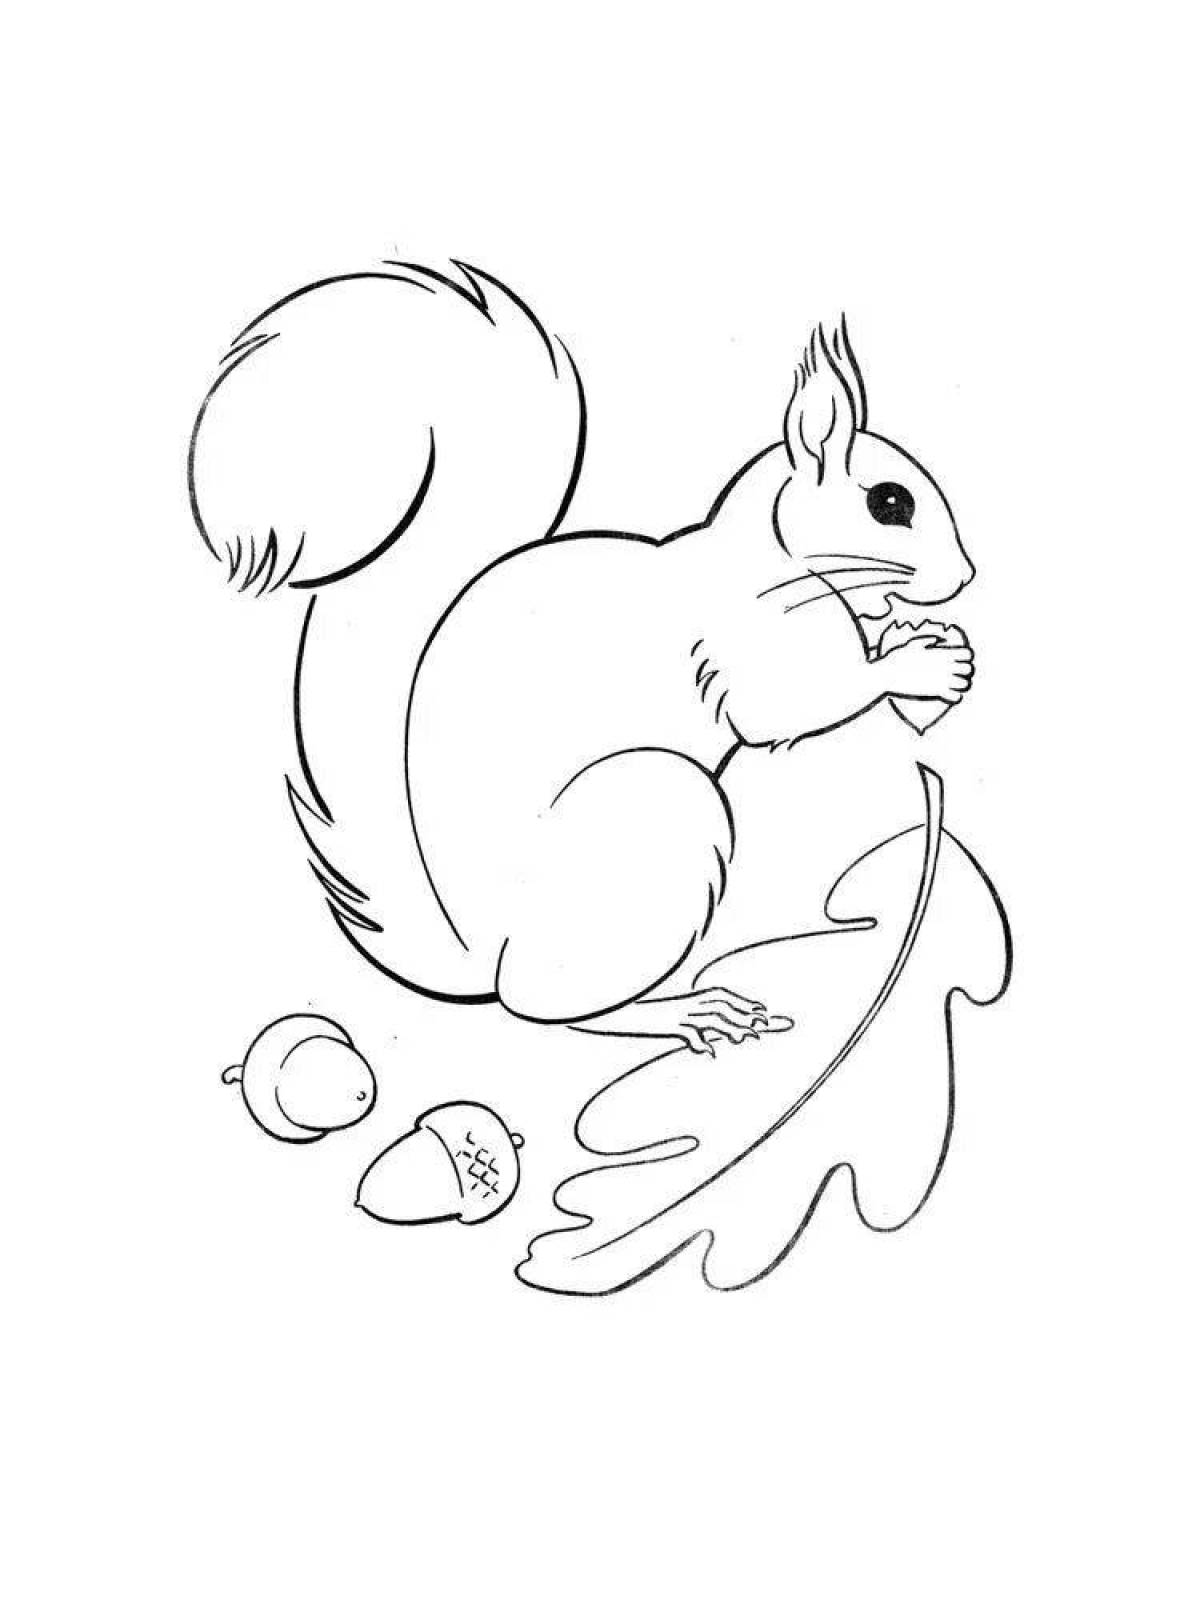 Colorful squirrel coloring book for kids